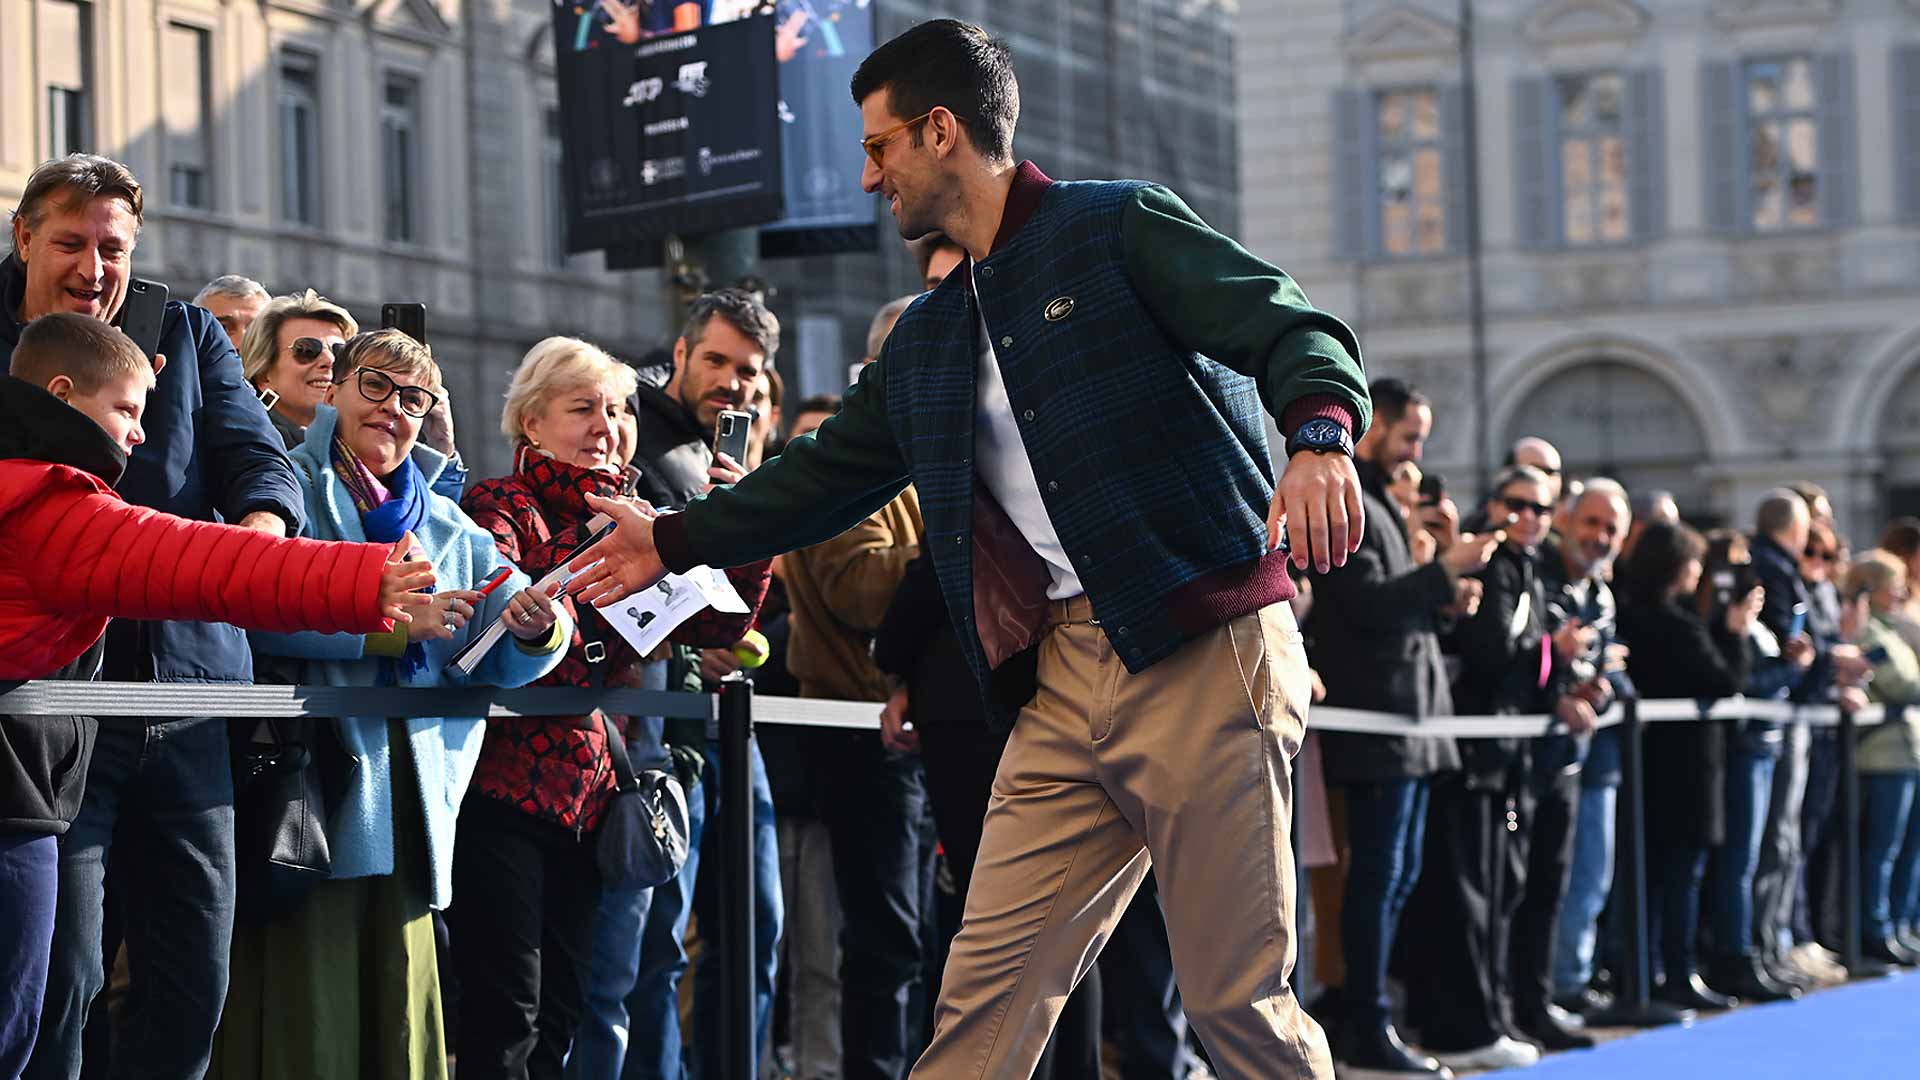 Novak Djokovic greets fans on Friday on the Piazza San Carlo in Turin.